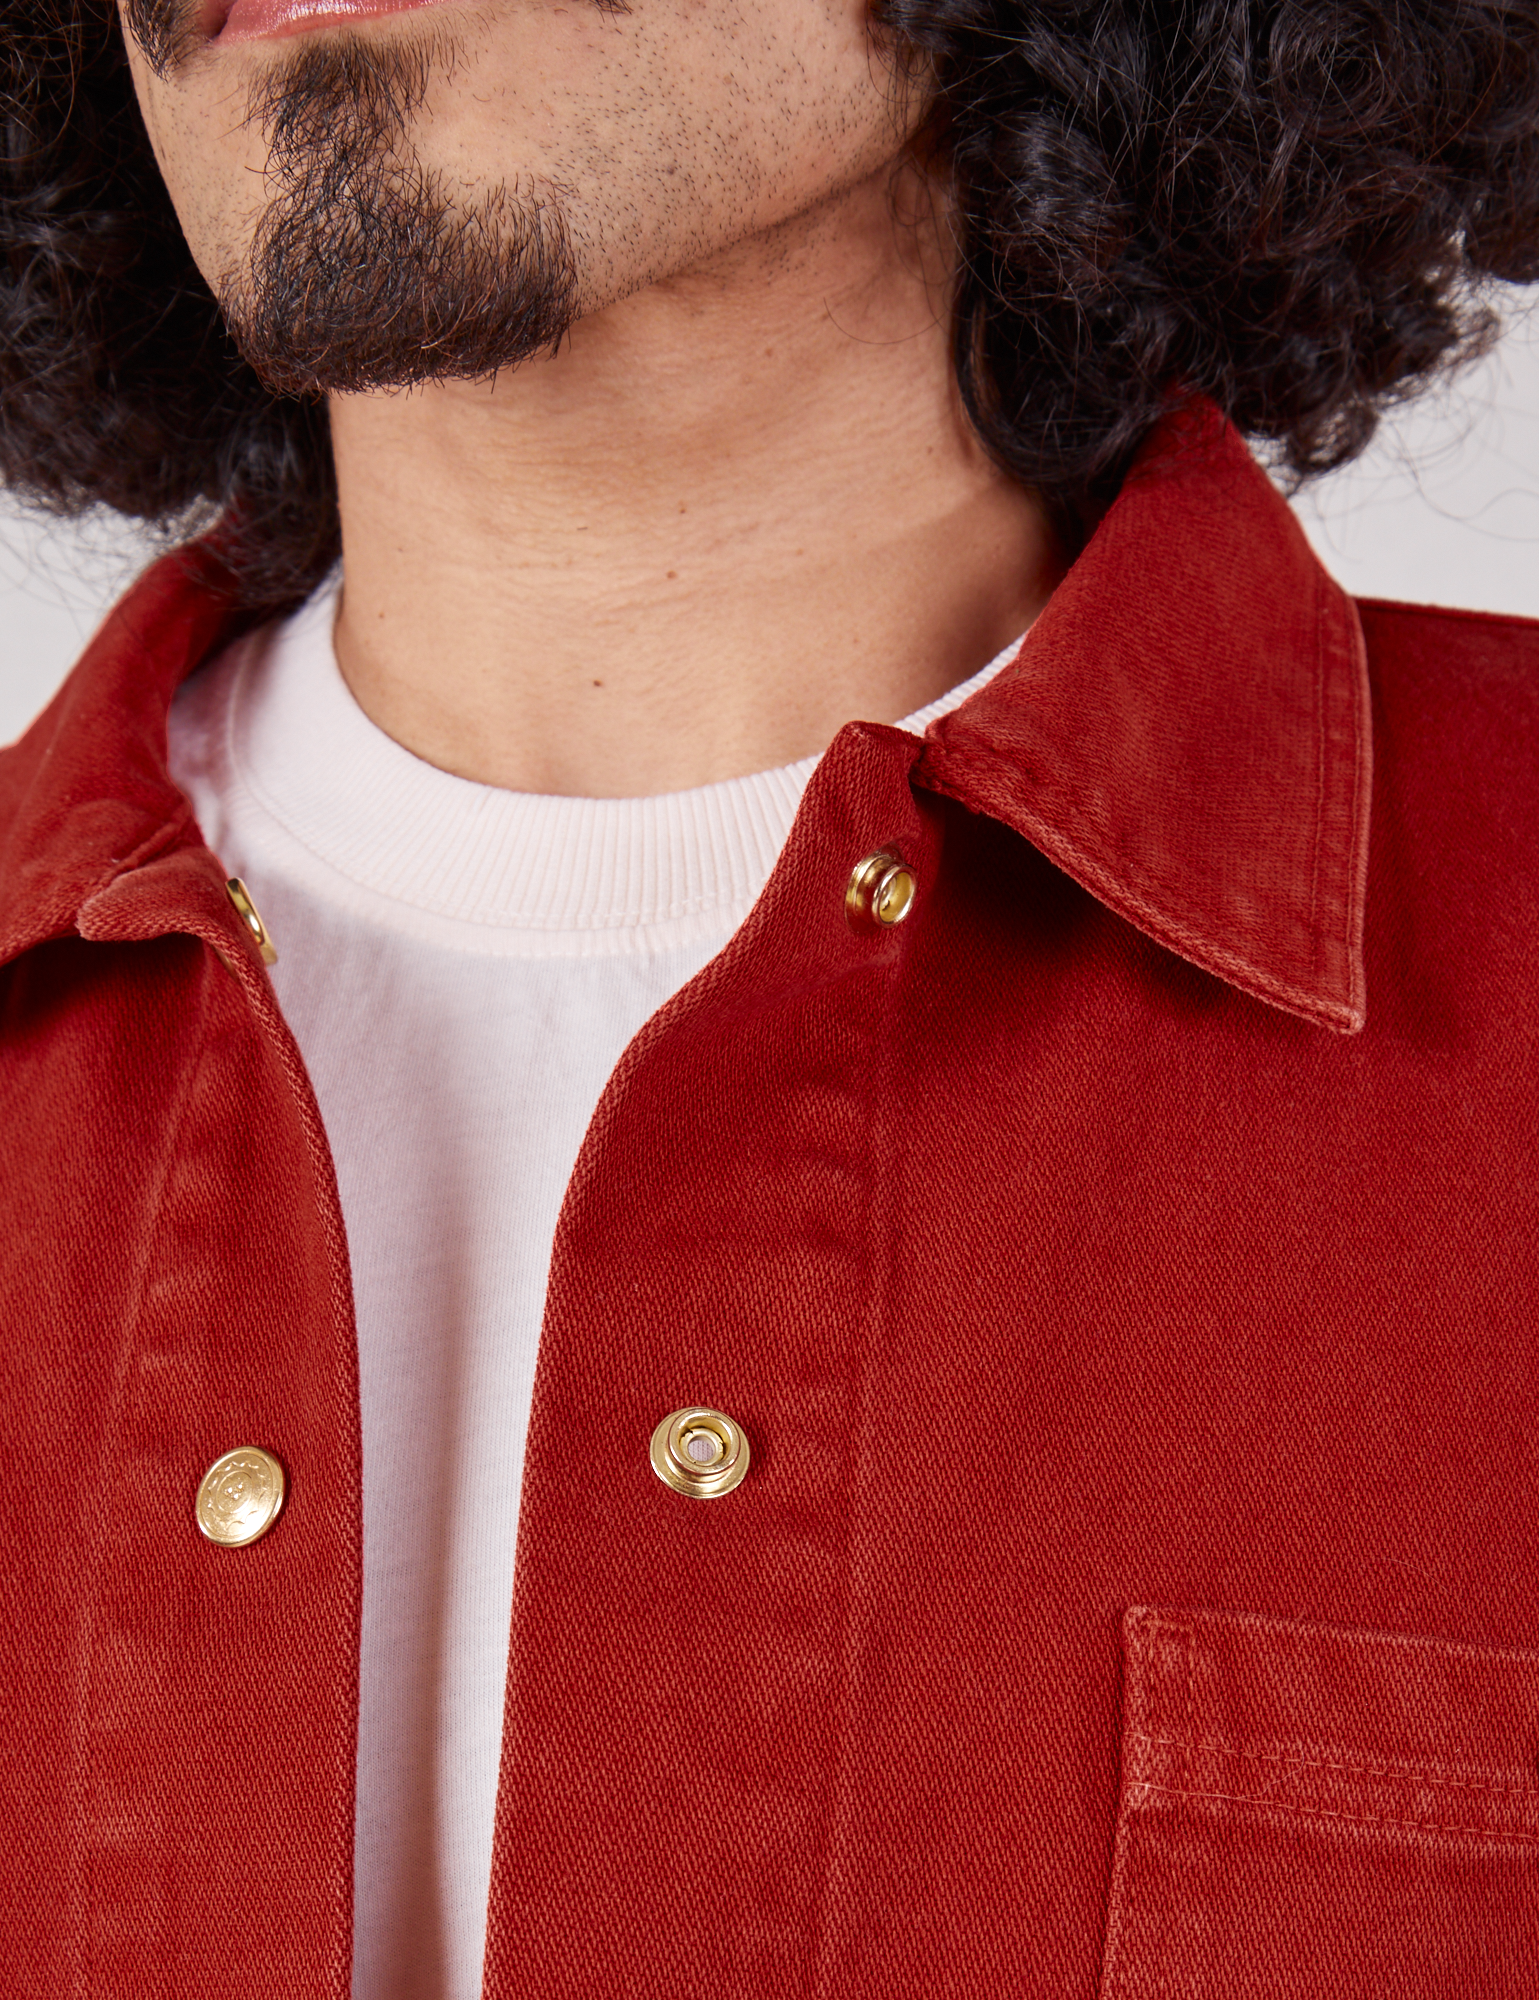 Denim Work Jacket in Paprika collar and brass snaps close up on Jesse